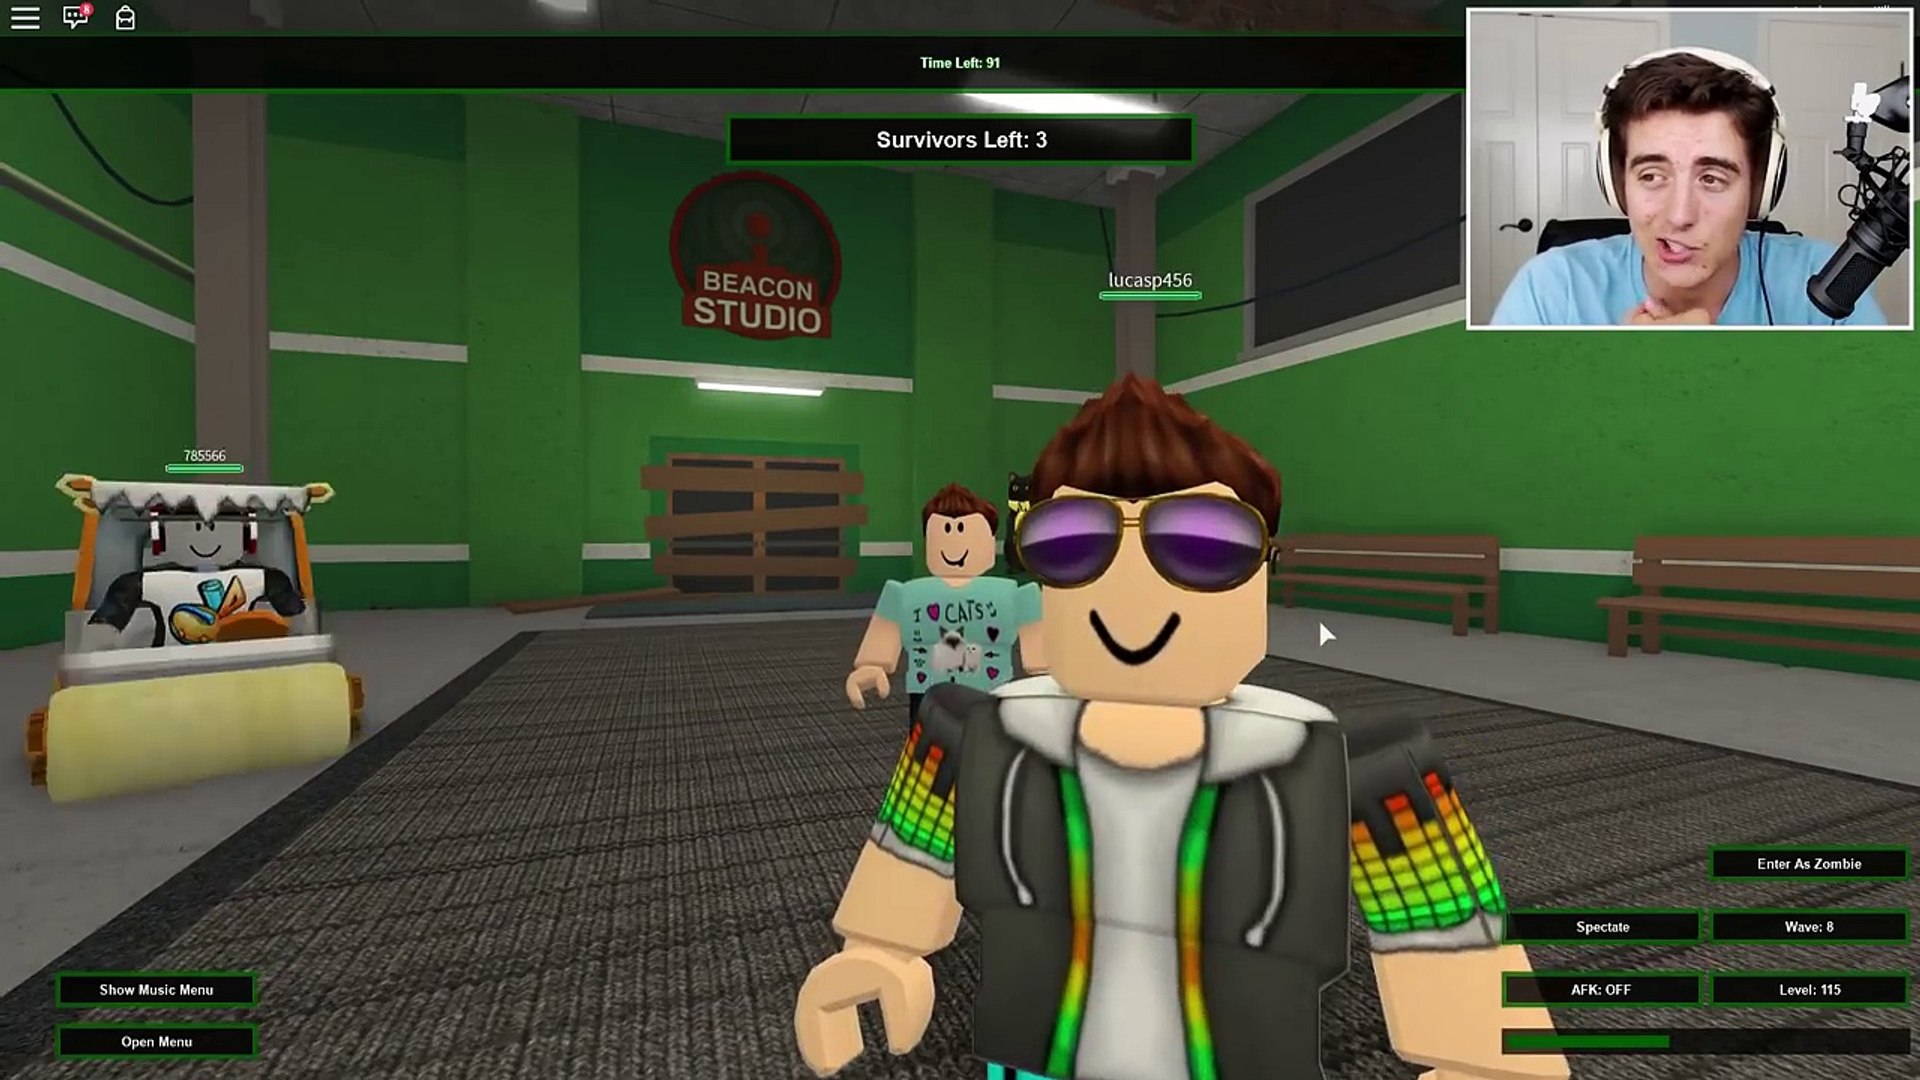 Roblox Adventures Zombie Rush Survive The Zombie Apocalypse - survive the zombie rush roblox adventures kid gaming roblox